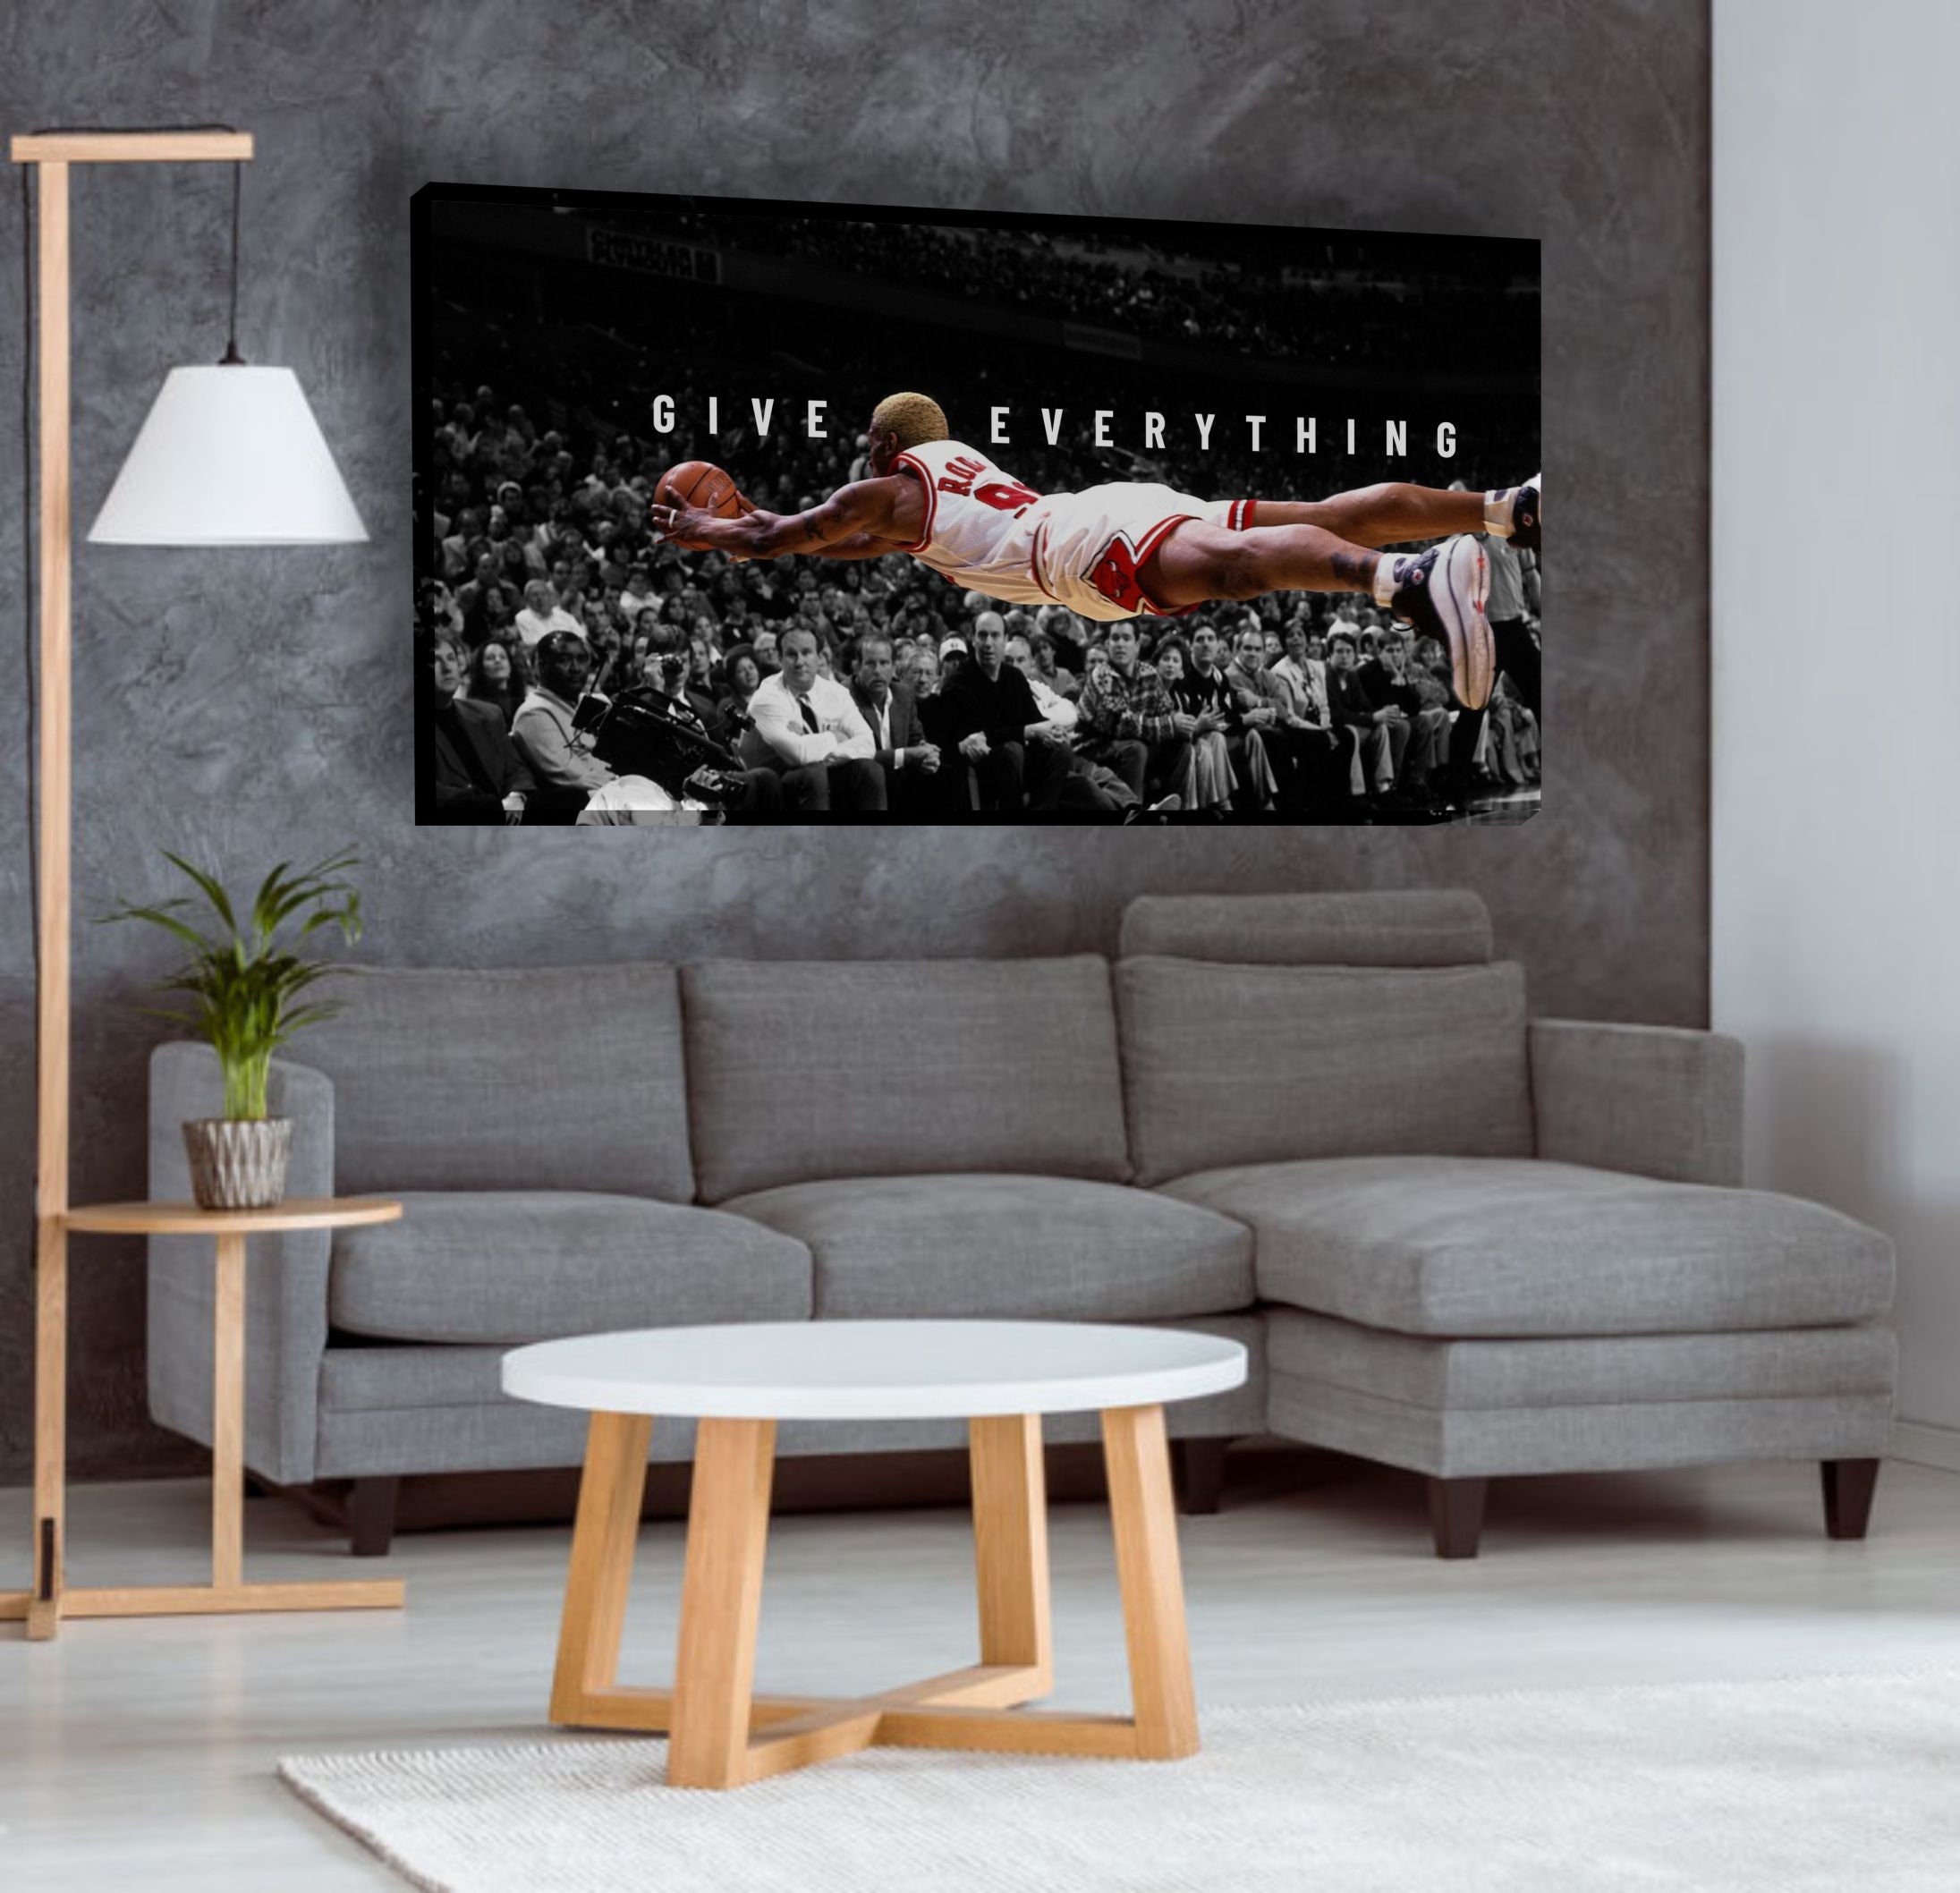 Dennis Rodman Poster Bulls Basketball Player Canvas Wall Art Decor  Paintings Picture for Living Room Homes Decoration 20×30inch(50×75cm)